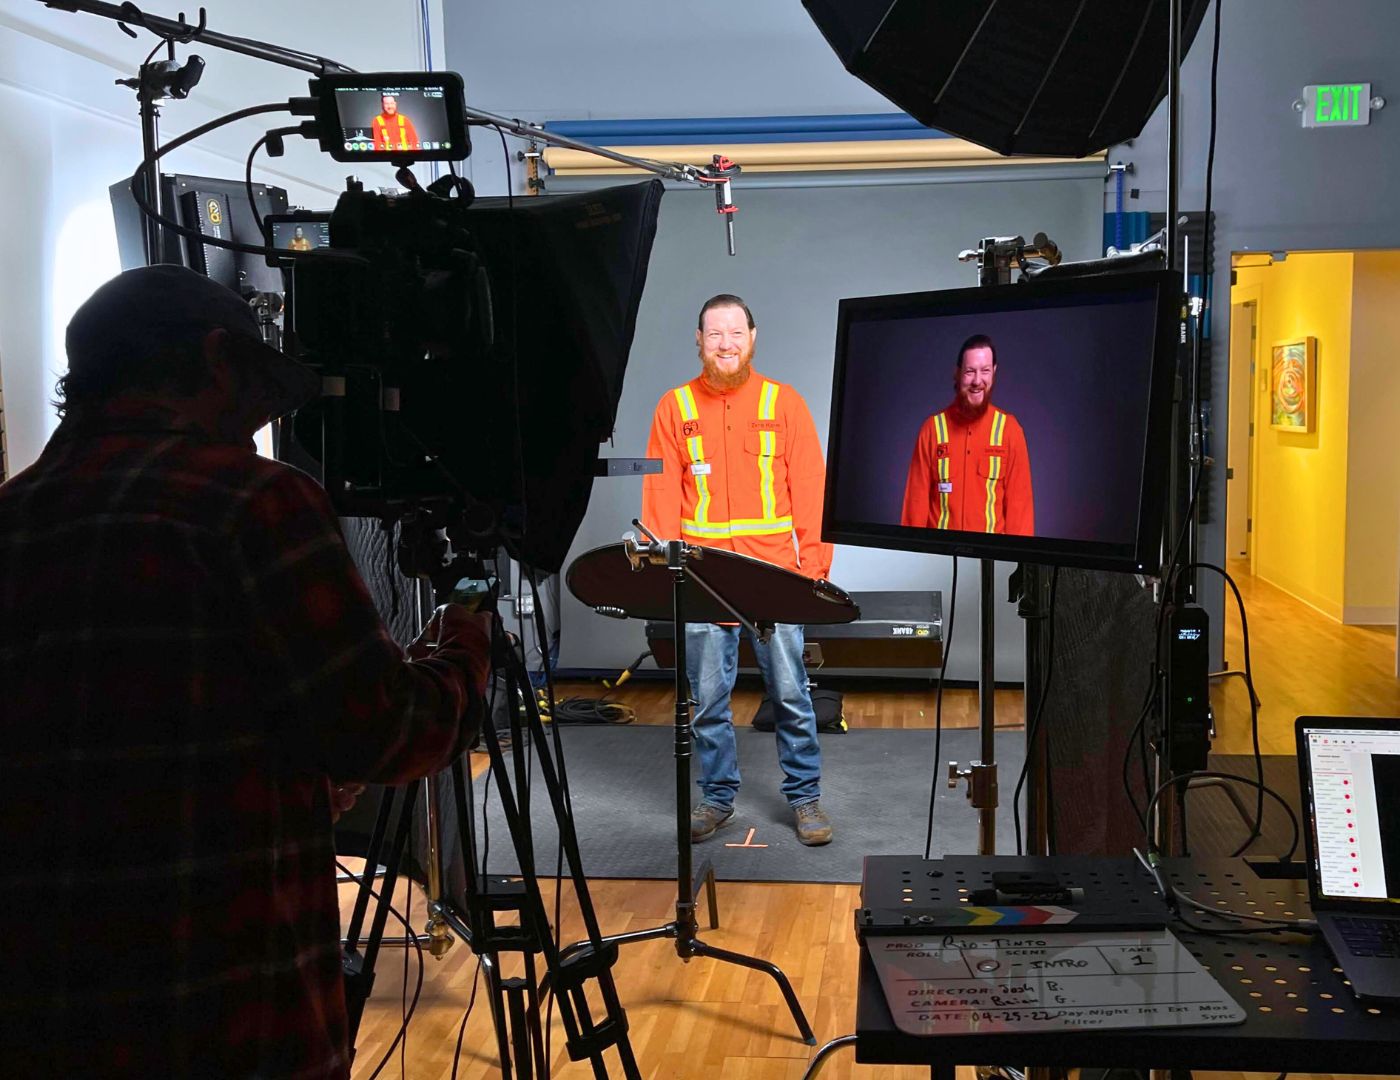 a man stands in a professional studio space in a high visibility vest. His image is seen in a production monitor as he looks at a teleprompter.